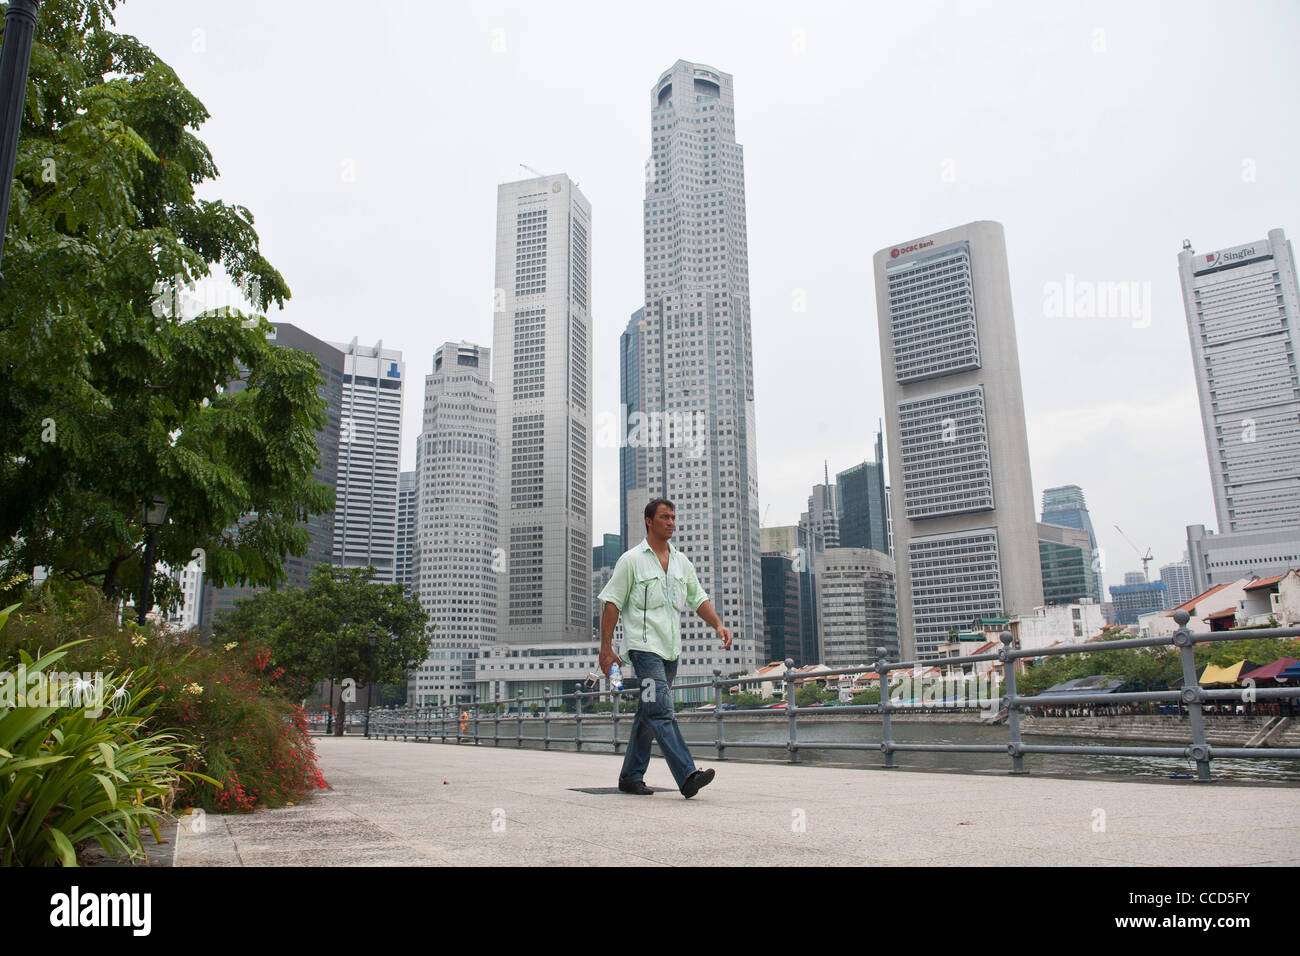 A man walks past the central business district of Singapore Stock Photo